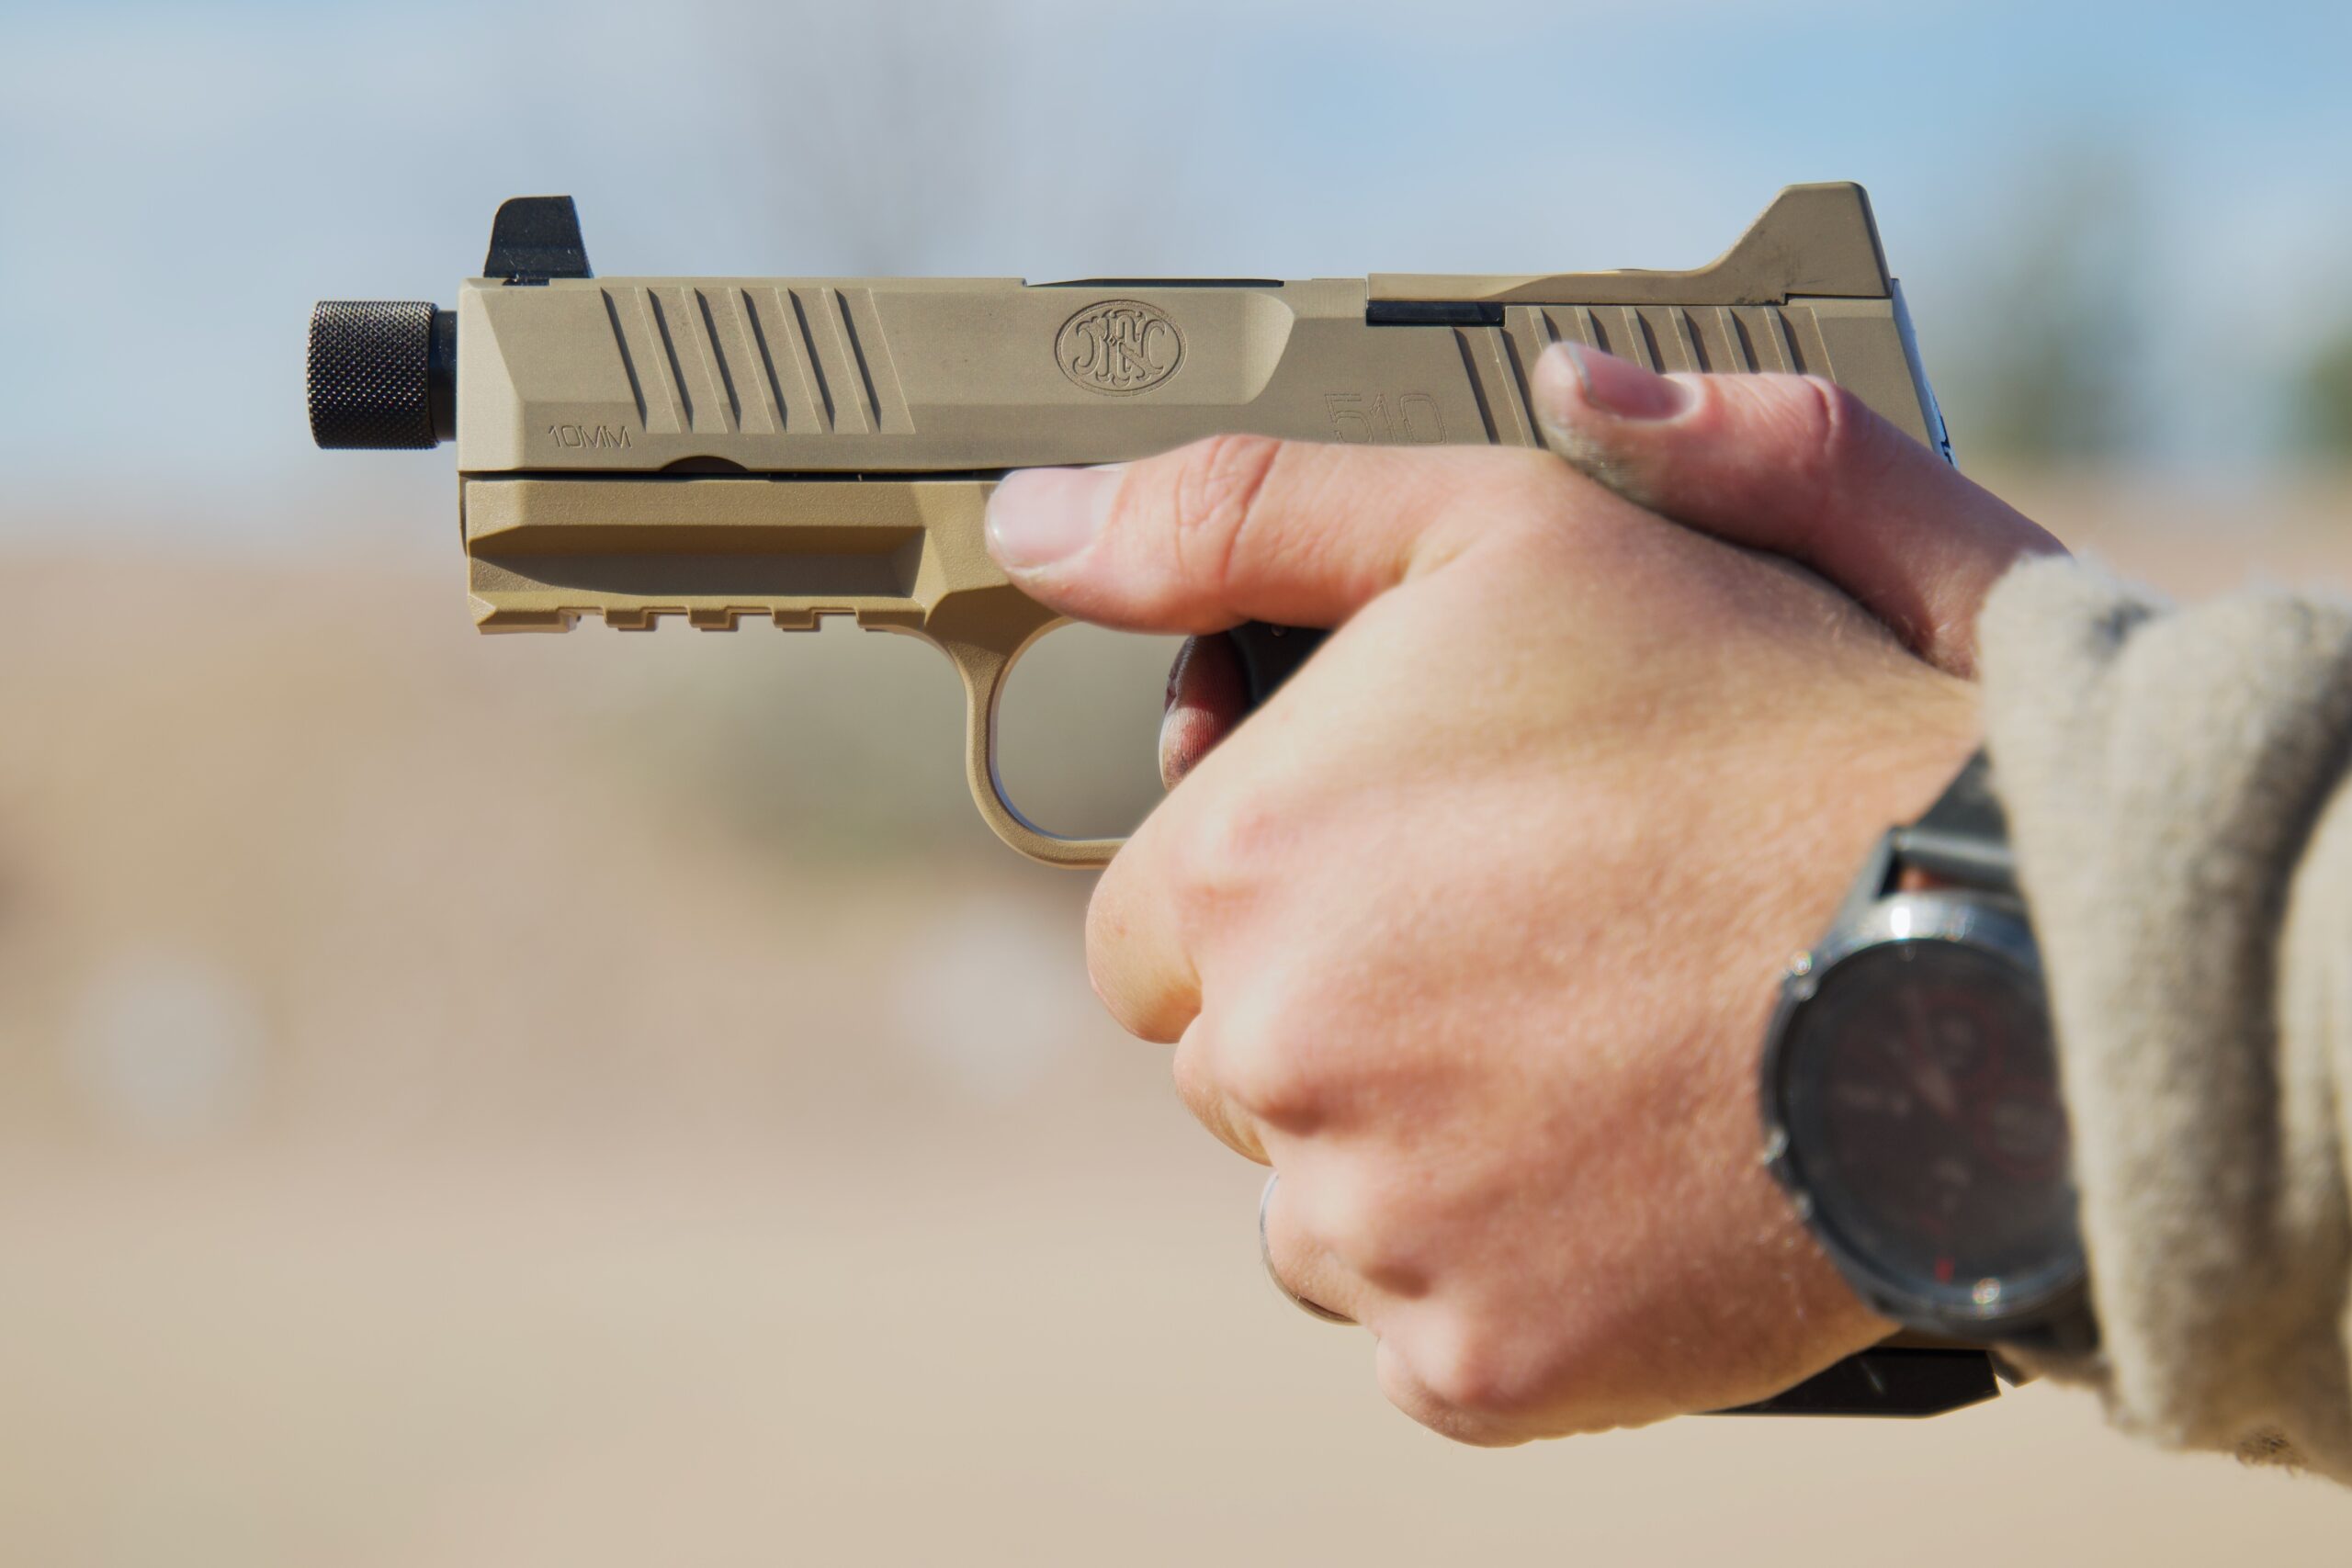 One of the best hanguns chambered in 10mm, the FN 510 Tactical